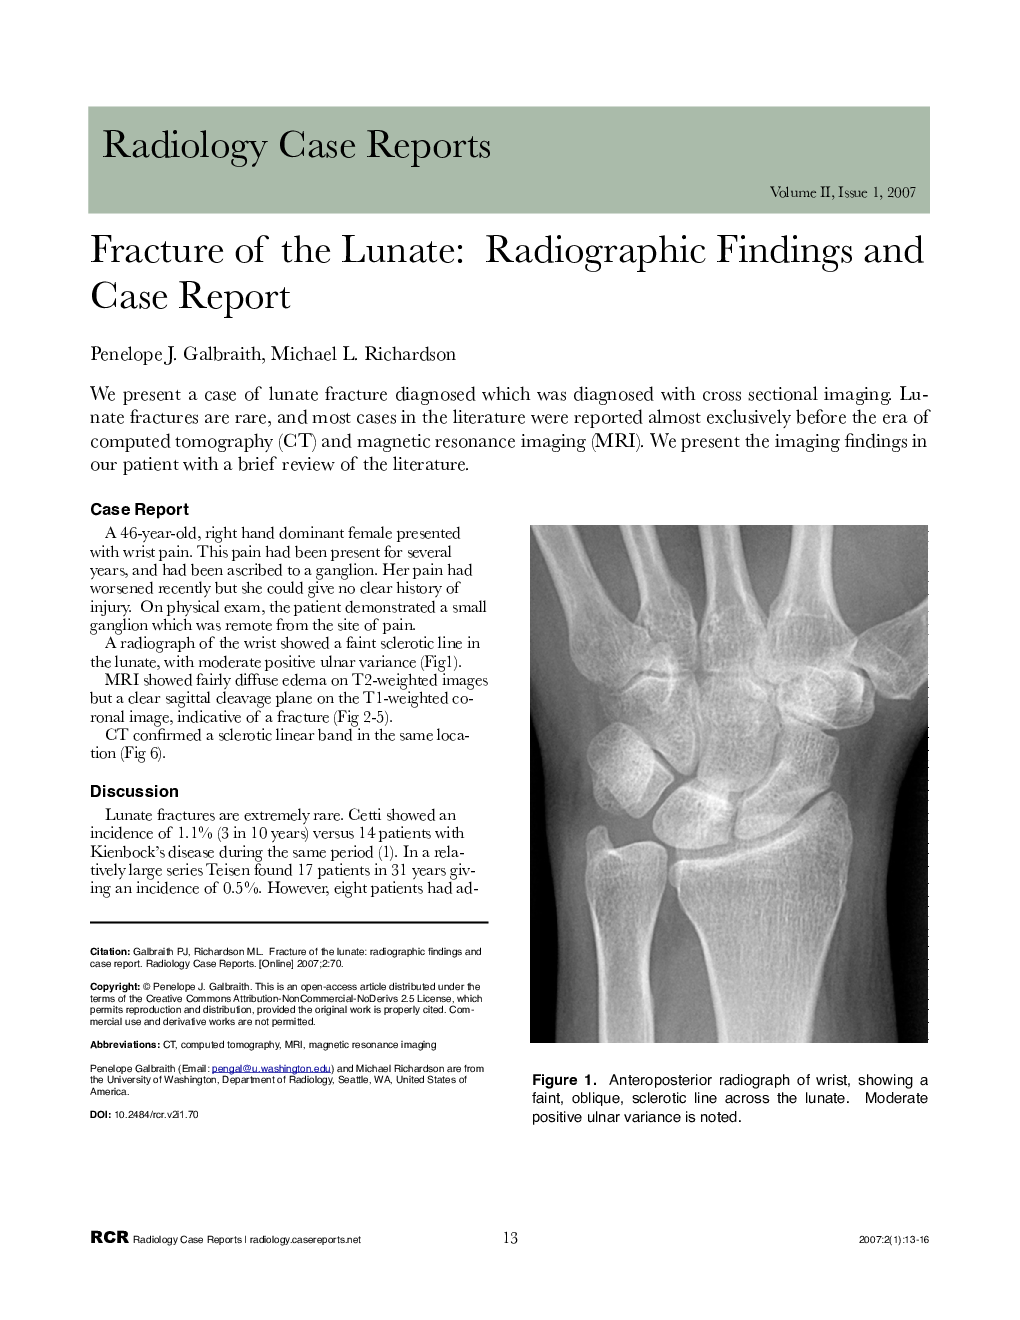 Fracture of the Lunate: Radiographic Findings and Case Report 